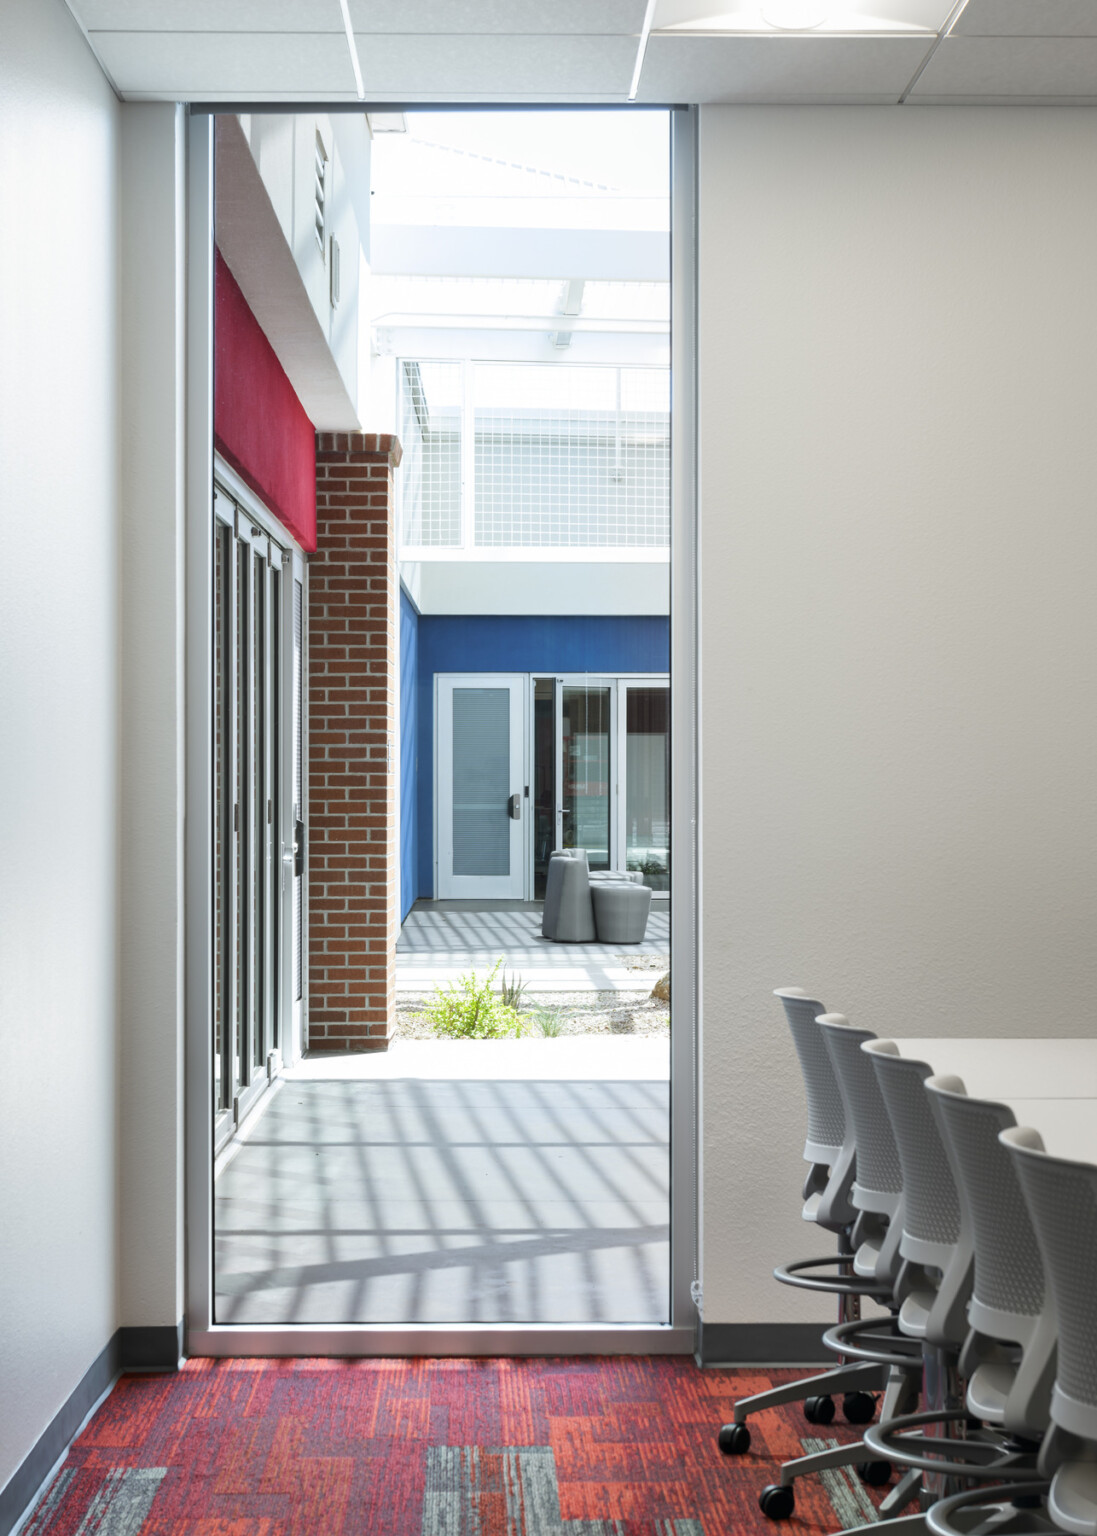 view from classroom to outside quad through floor-to-ceiling window, red geometric carpeting, white tables and desk chairs